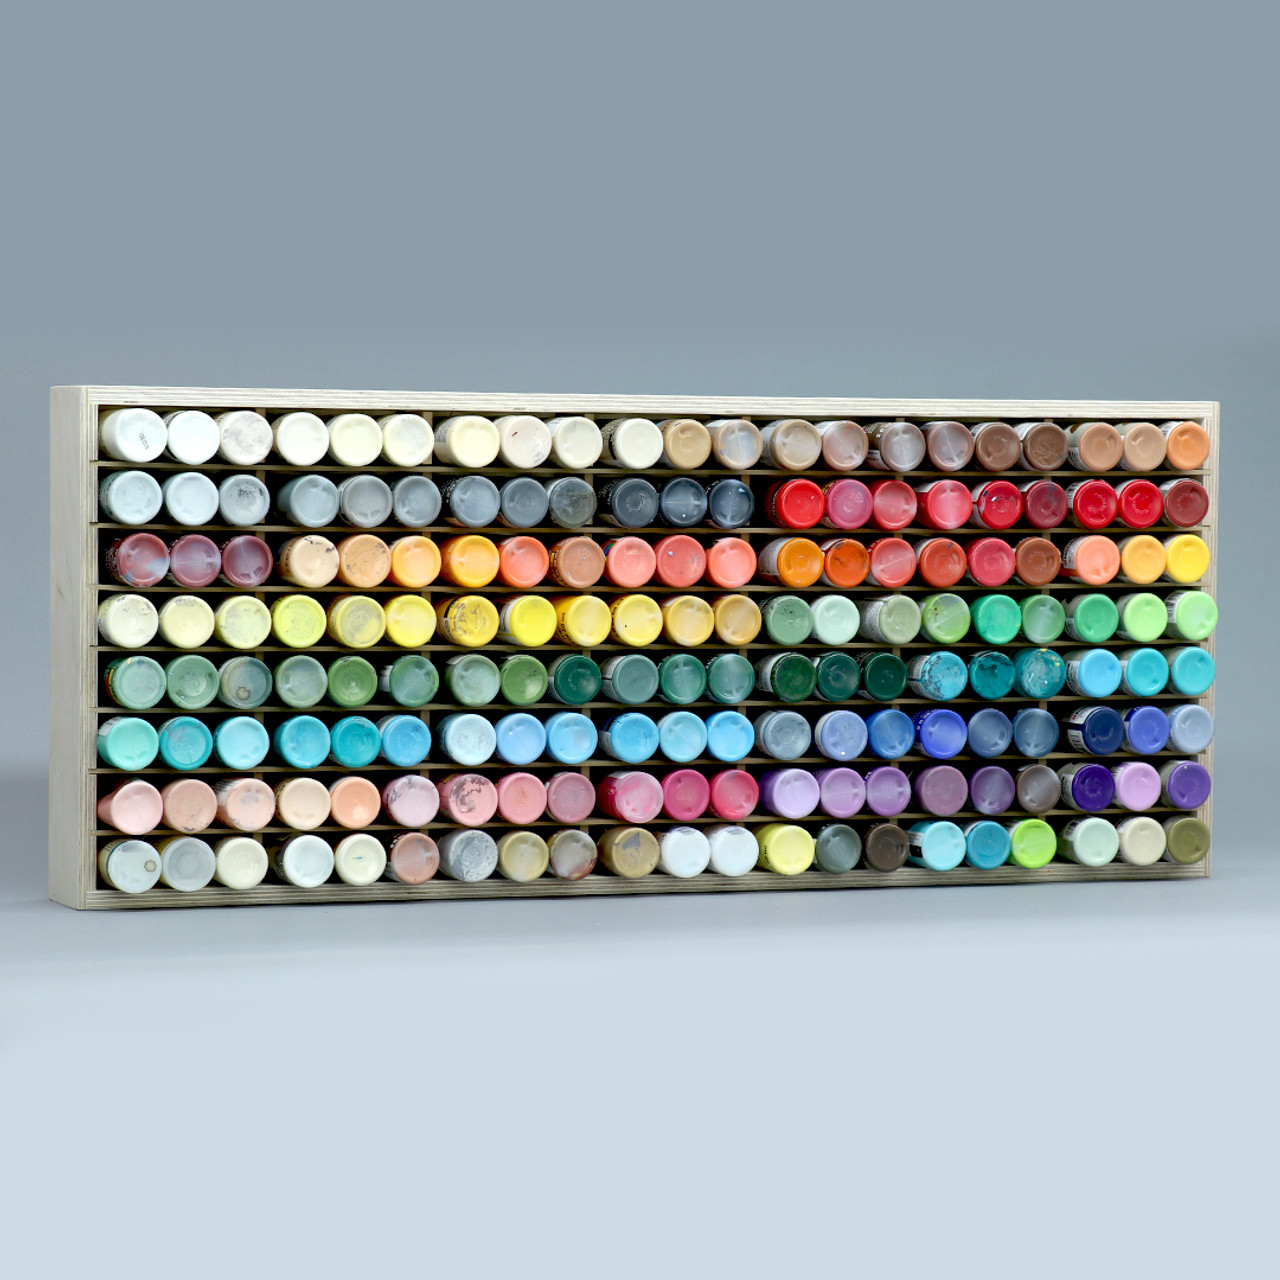 Paint Holder for Acrylic Painting Paint Pallet for Acrylic Painting Paint